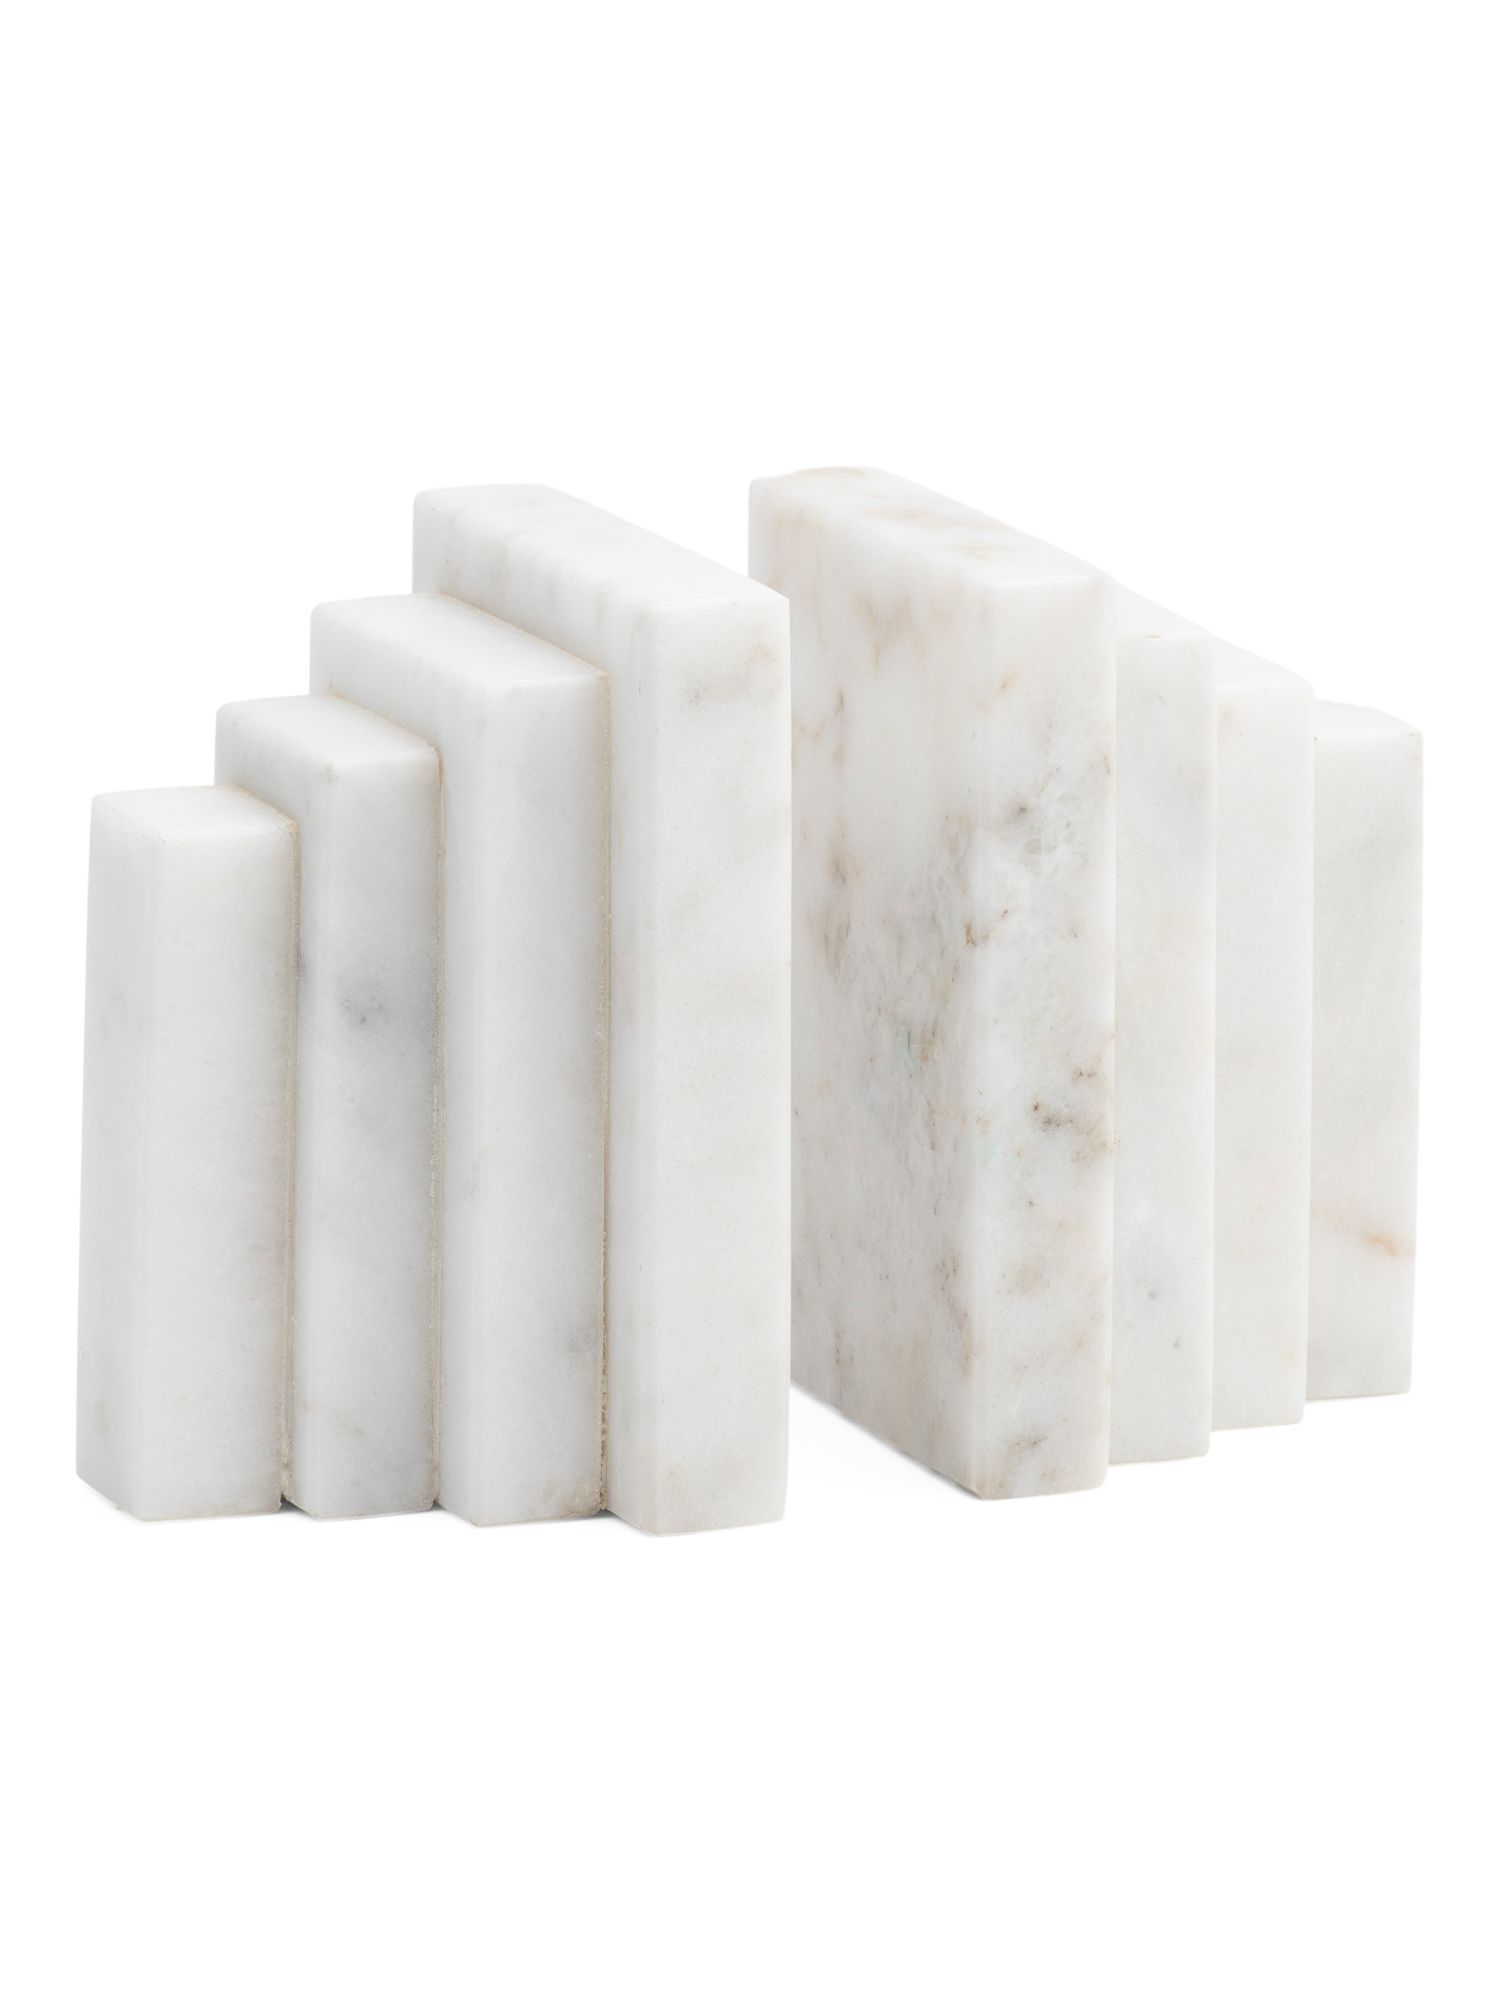 7in Marble Bookends | Pillows & Decor | Marshalls | Marshalls